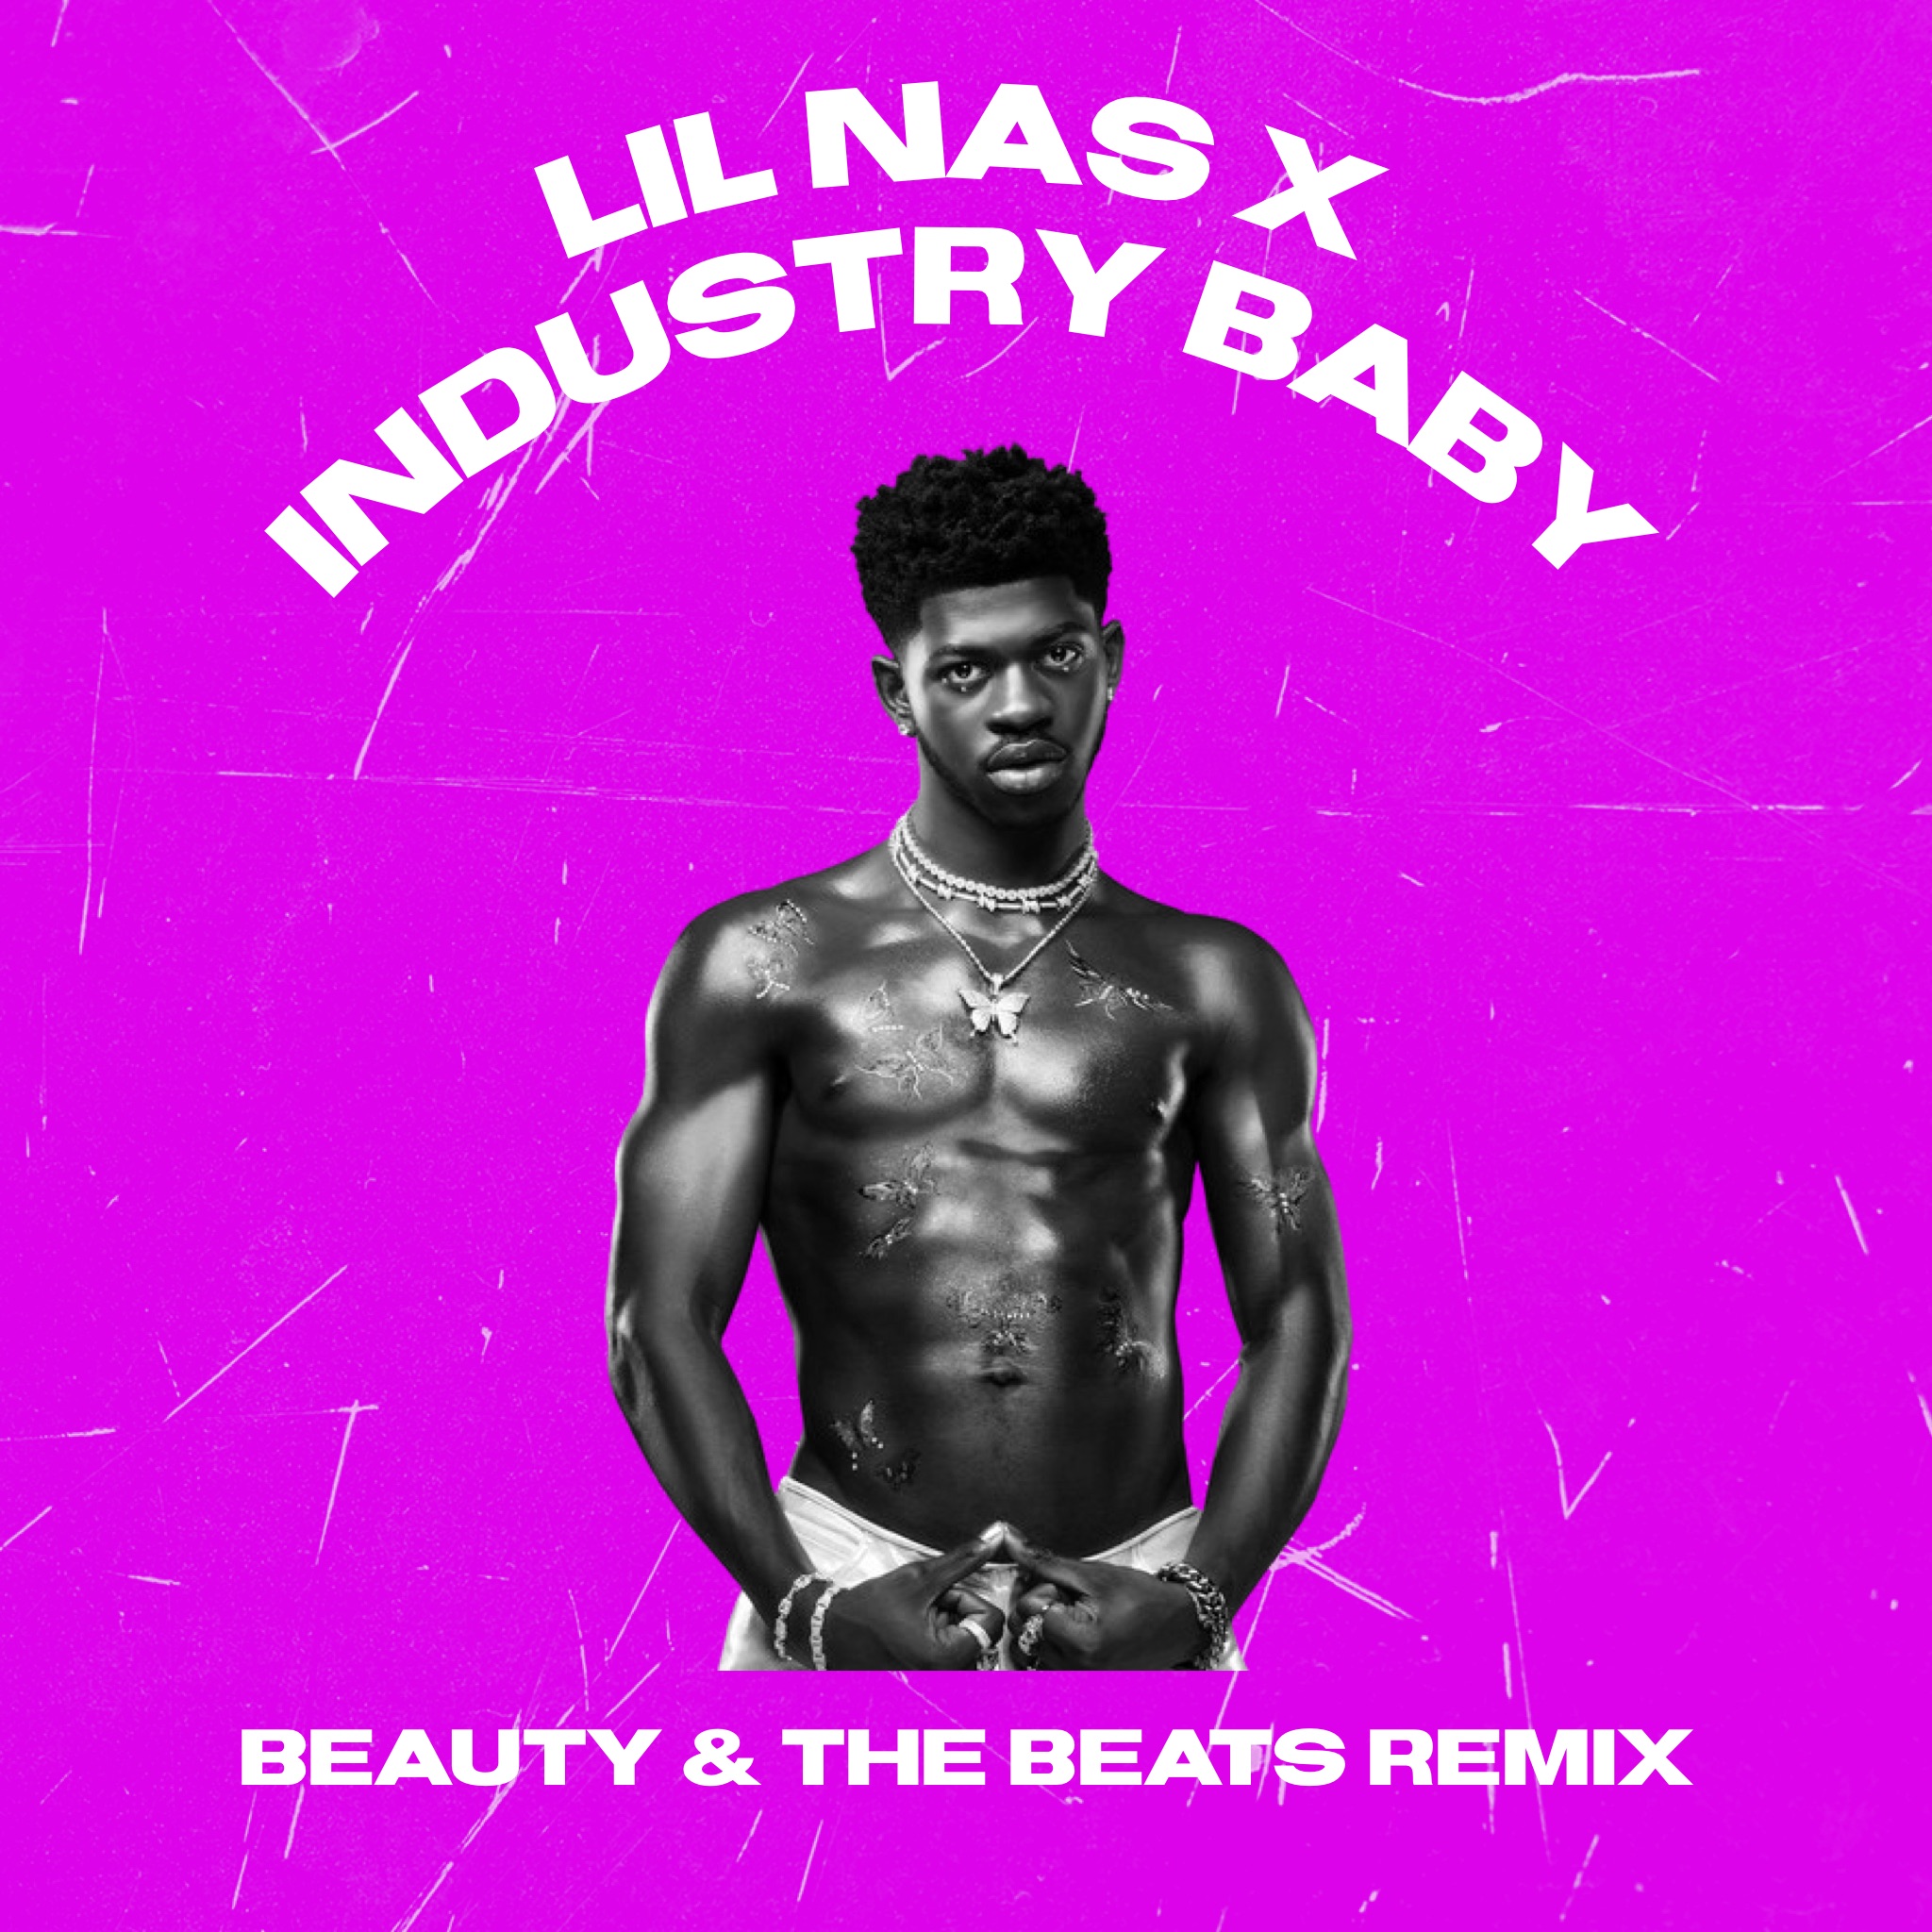 LIL NAS X - INDUSTRY BABY (BEAUTY & THE BEATS REMIX)